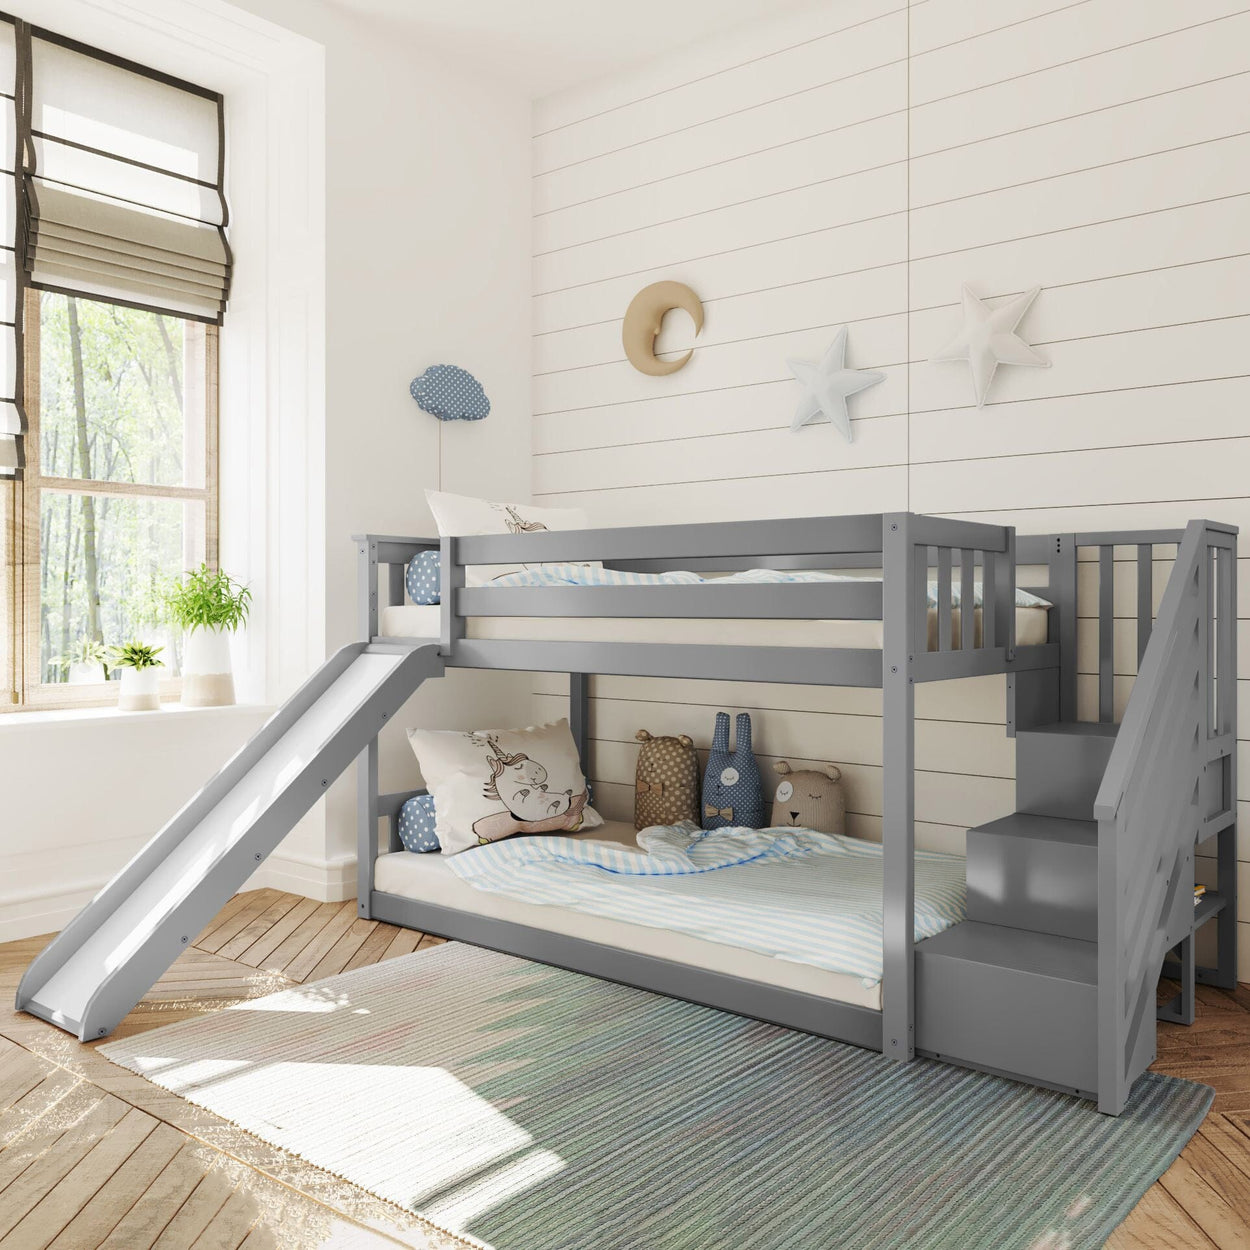 185221-121 : Bunk Beds Low Bunk w/ Staircase Bunk with Slide, Grey